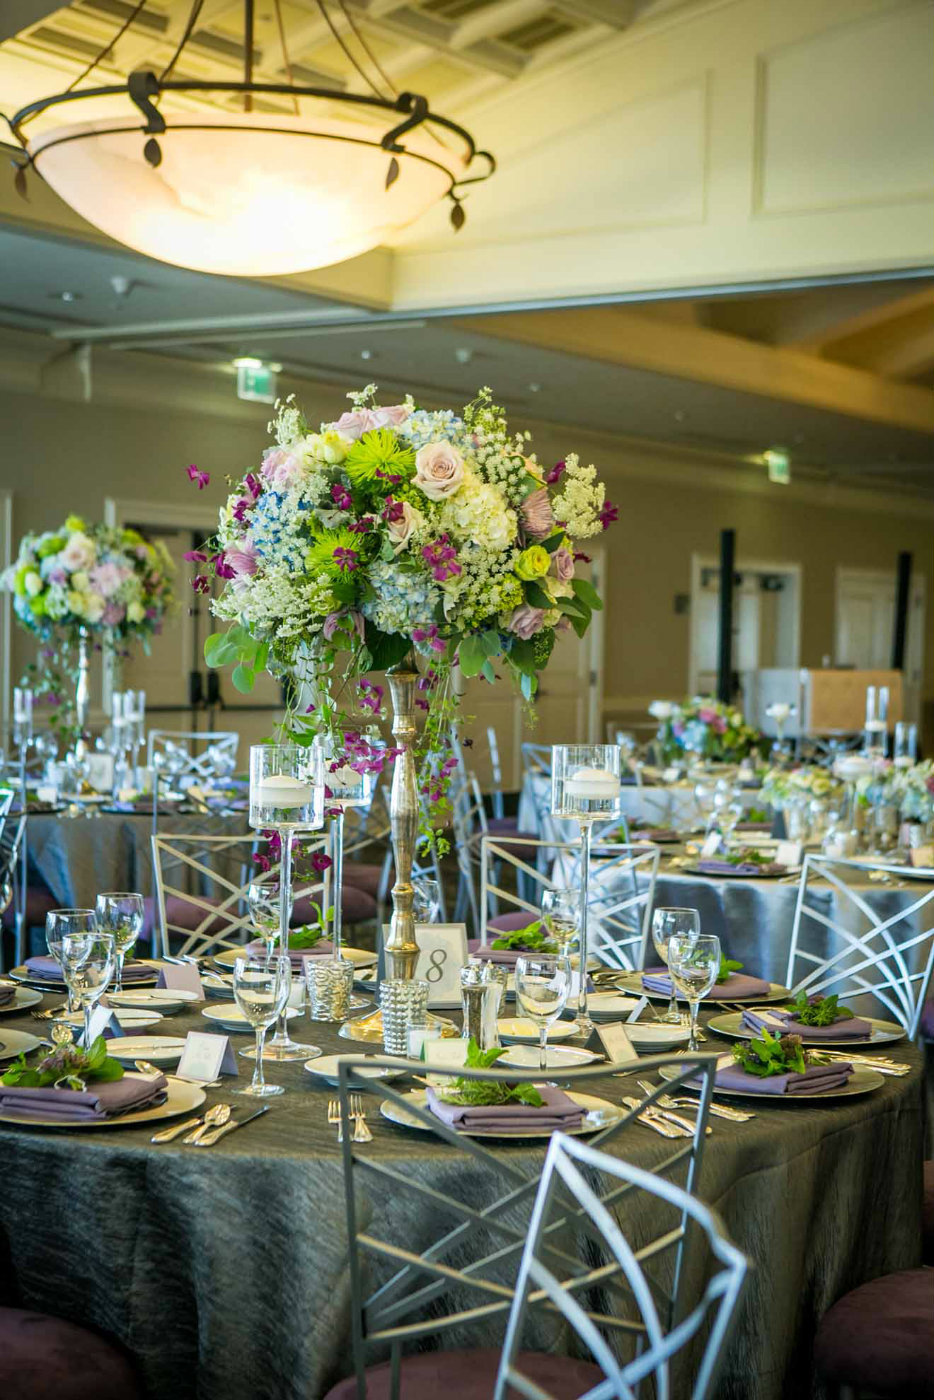 large centerpiece of blue hydrangea, purple roses, green chrysanthemums, , and trailing purple clematis, with floating glass candle holders on silver linen and silver Chameleon chairs